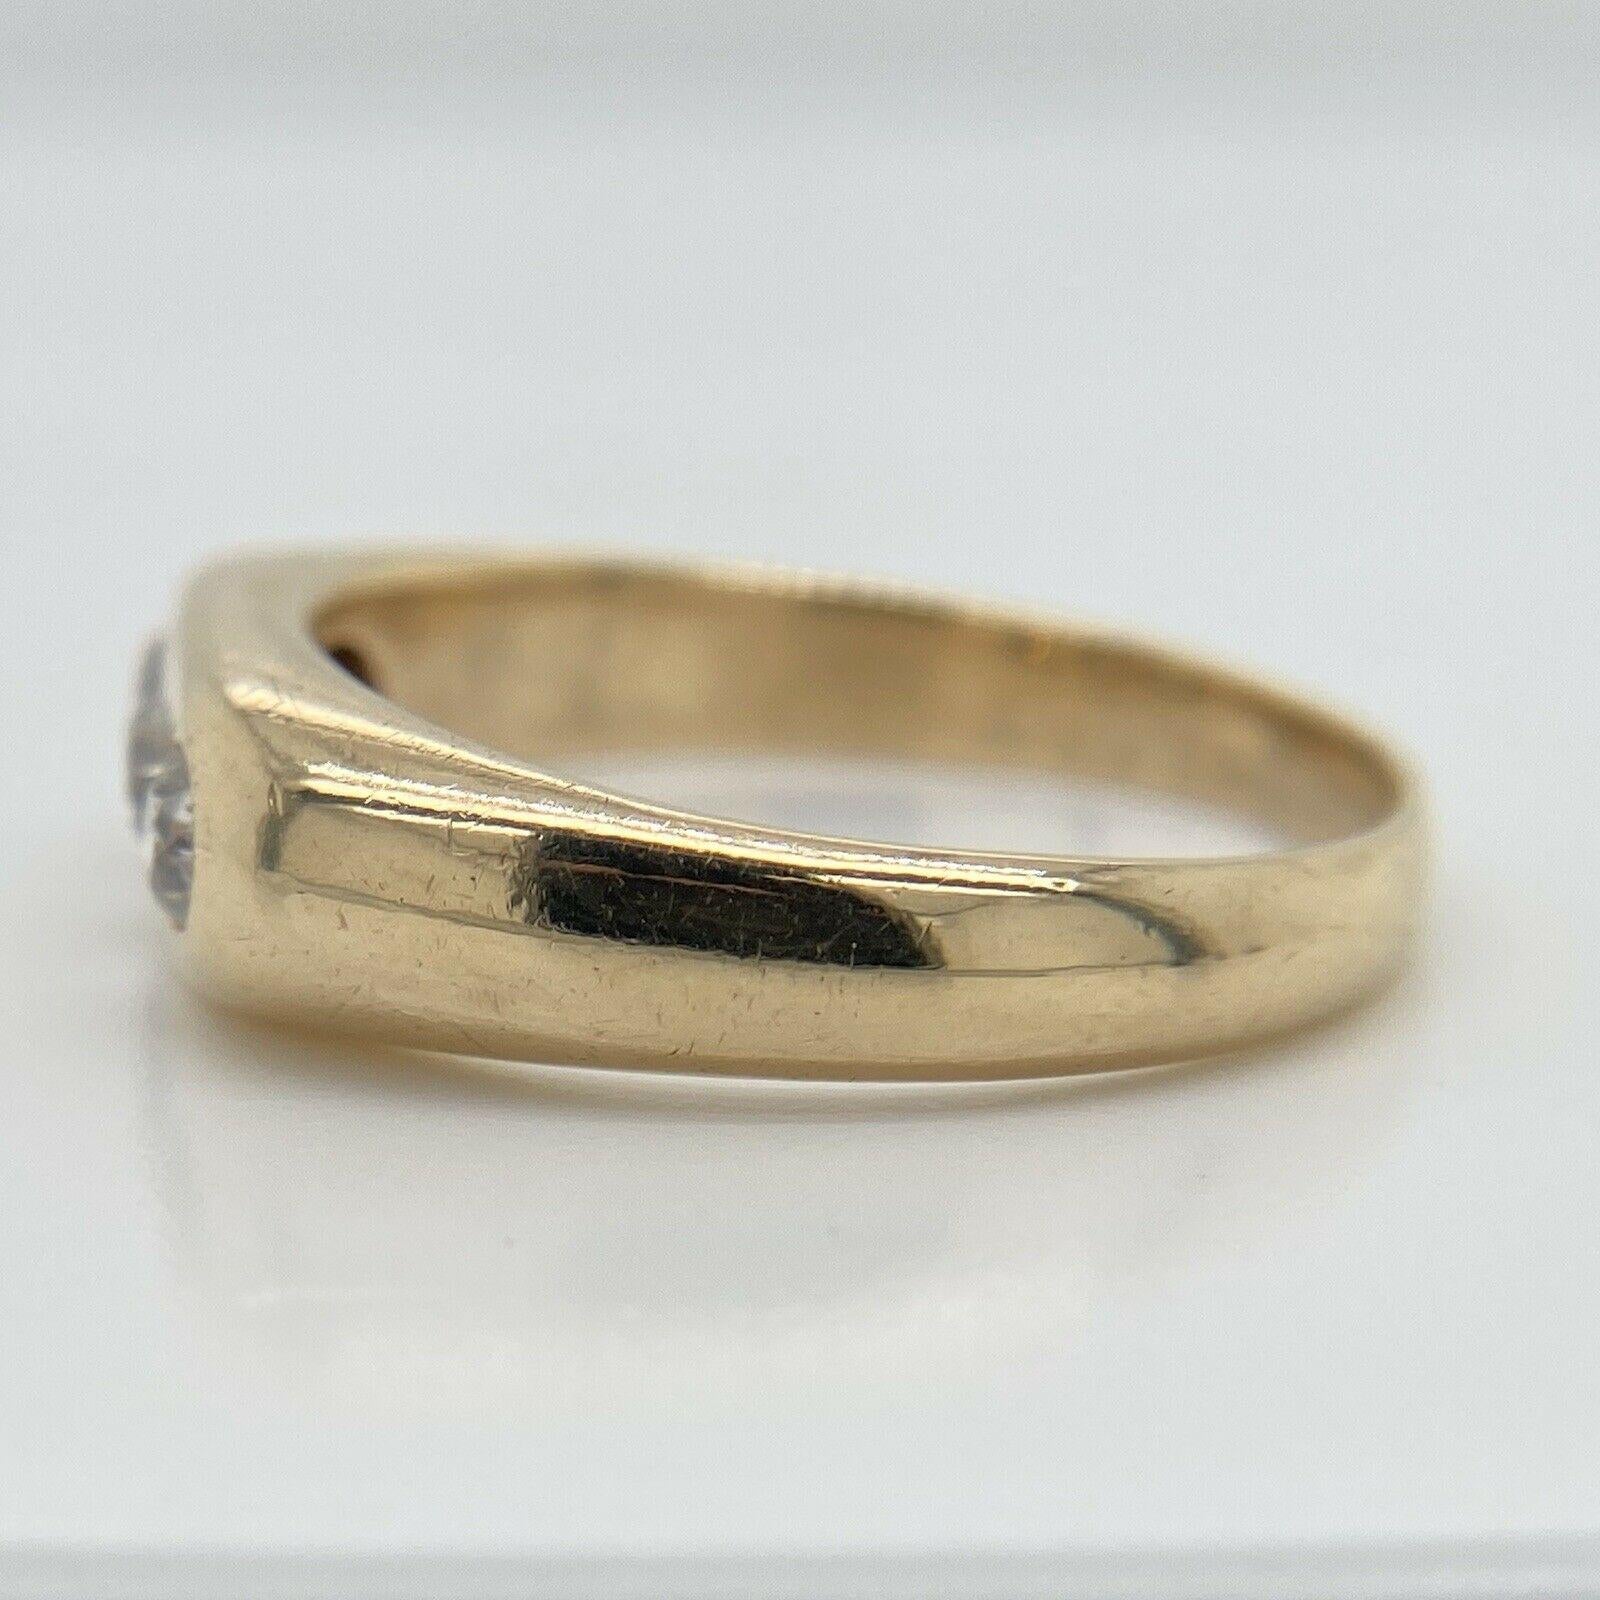 This antique solid 14K yellow gold ring features three genuine old mine cut diamonds that weigh approximately 0.60CTTW and are H/VS2-SI1 quality. The top of the ring is 6.45mm wide, the ring is a size 10.25 and weighs 6.3 grams. 